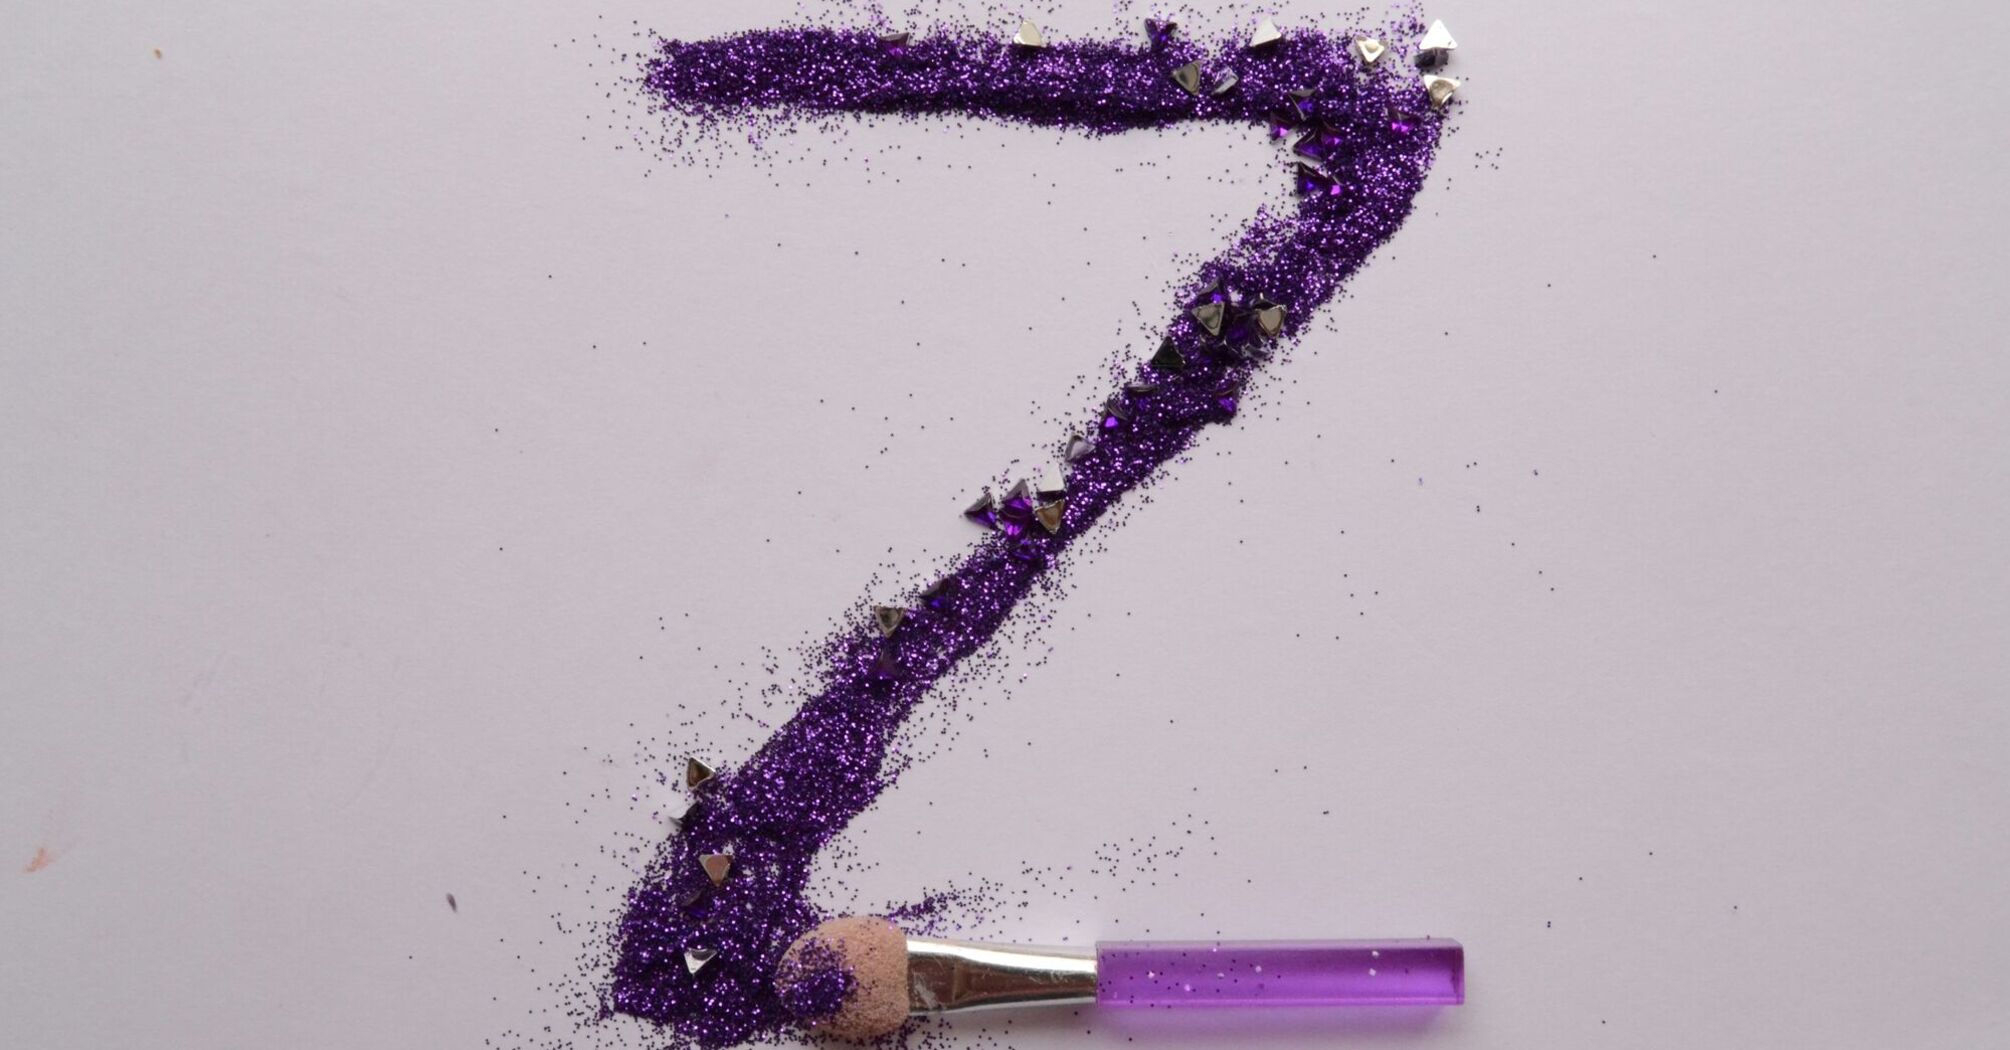 purple and white stick with white background